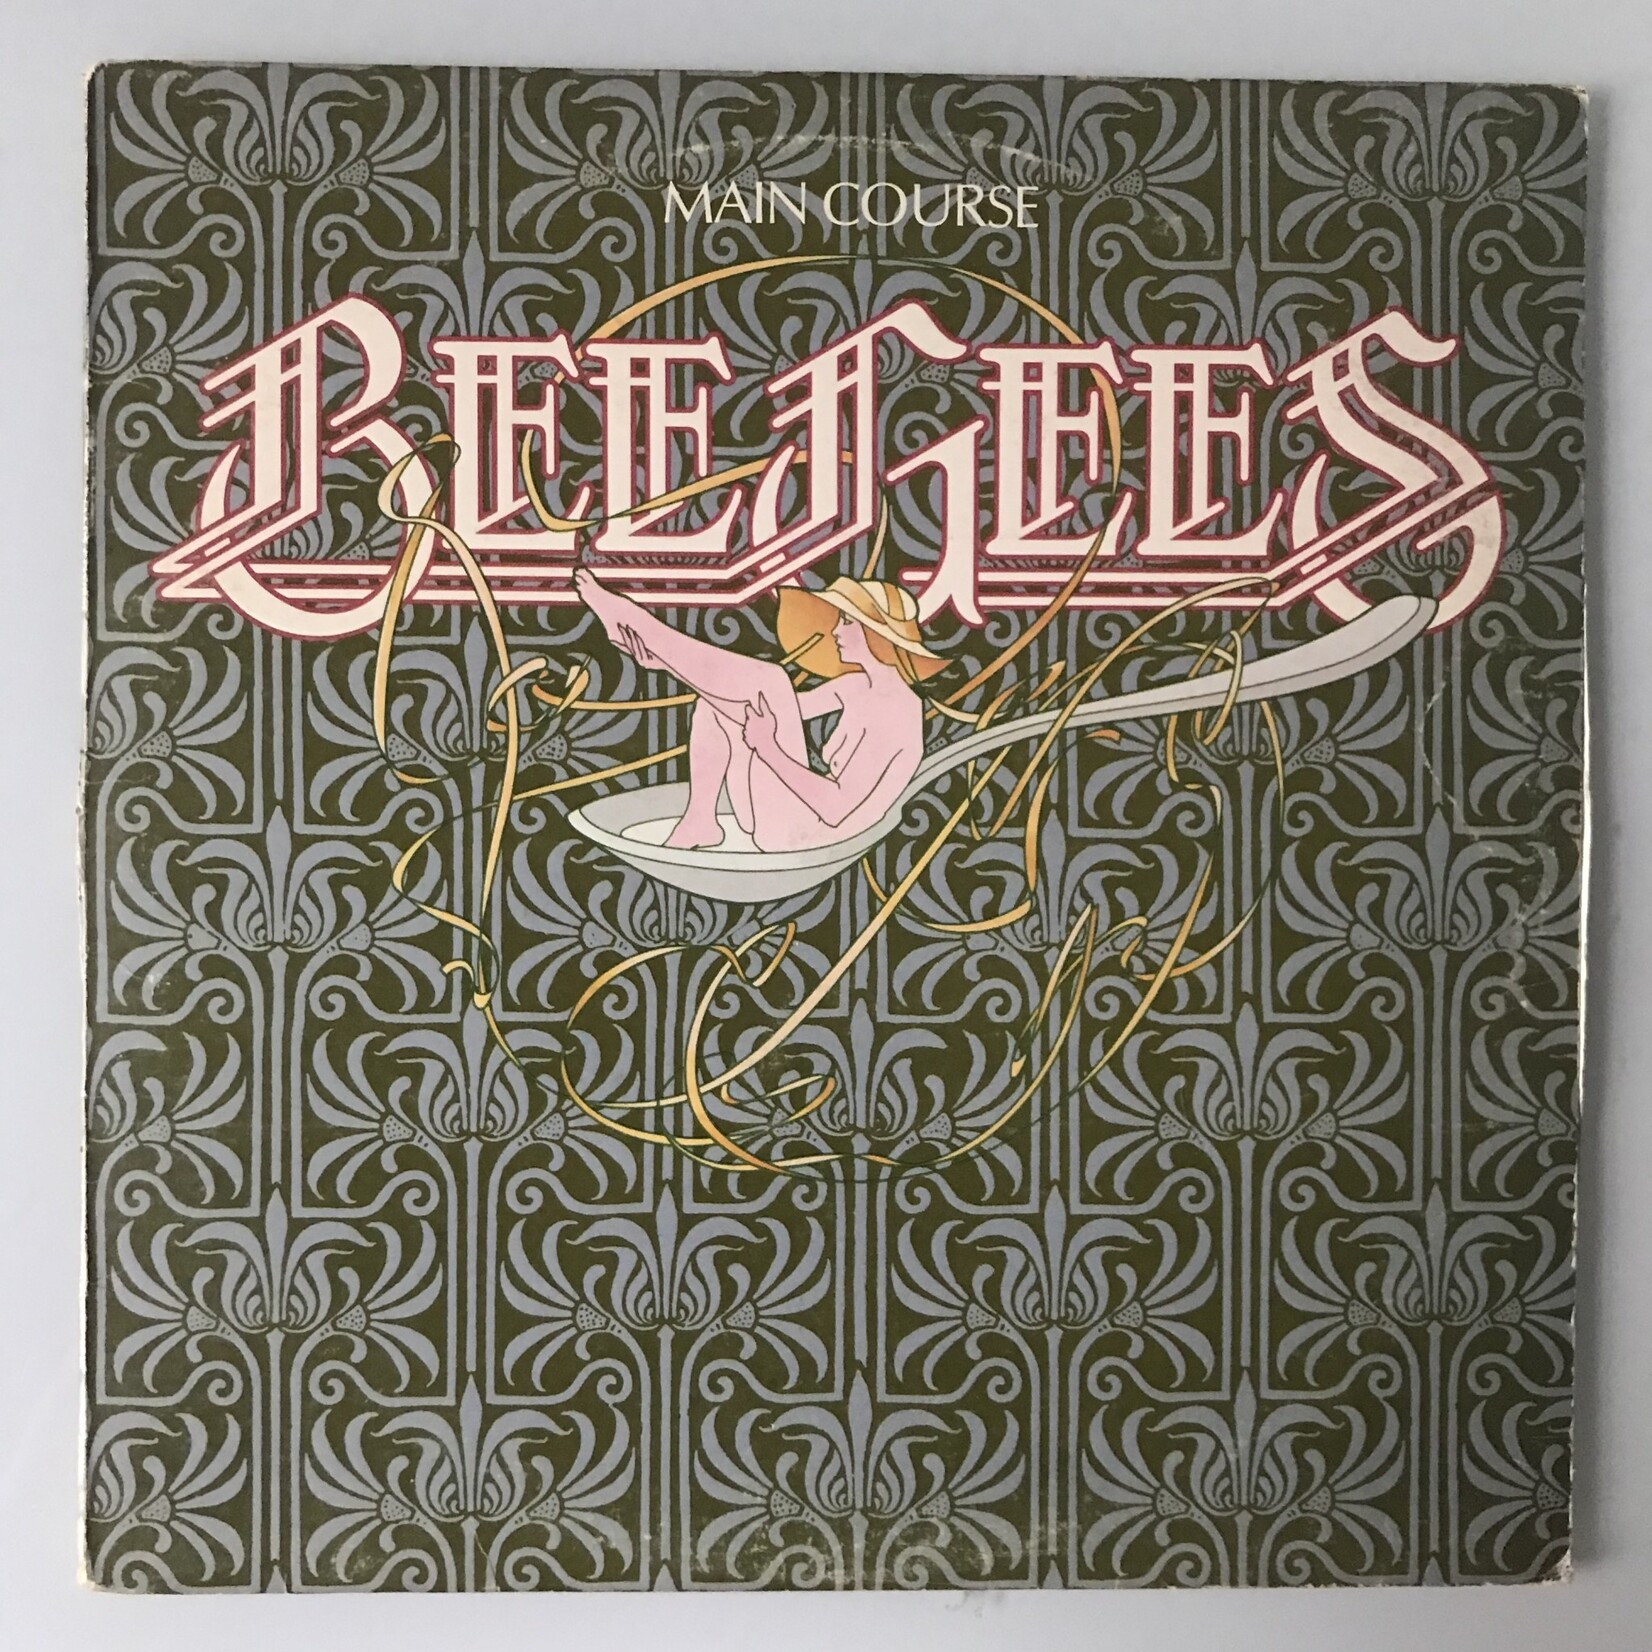 Bee Gees - Main Course - Vinyl LP (USED)